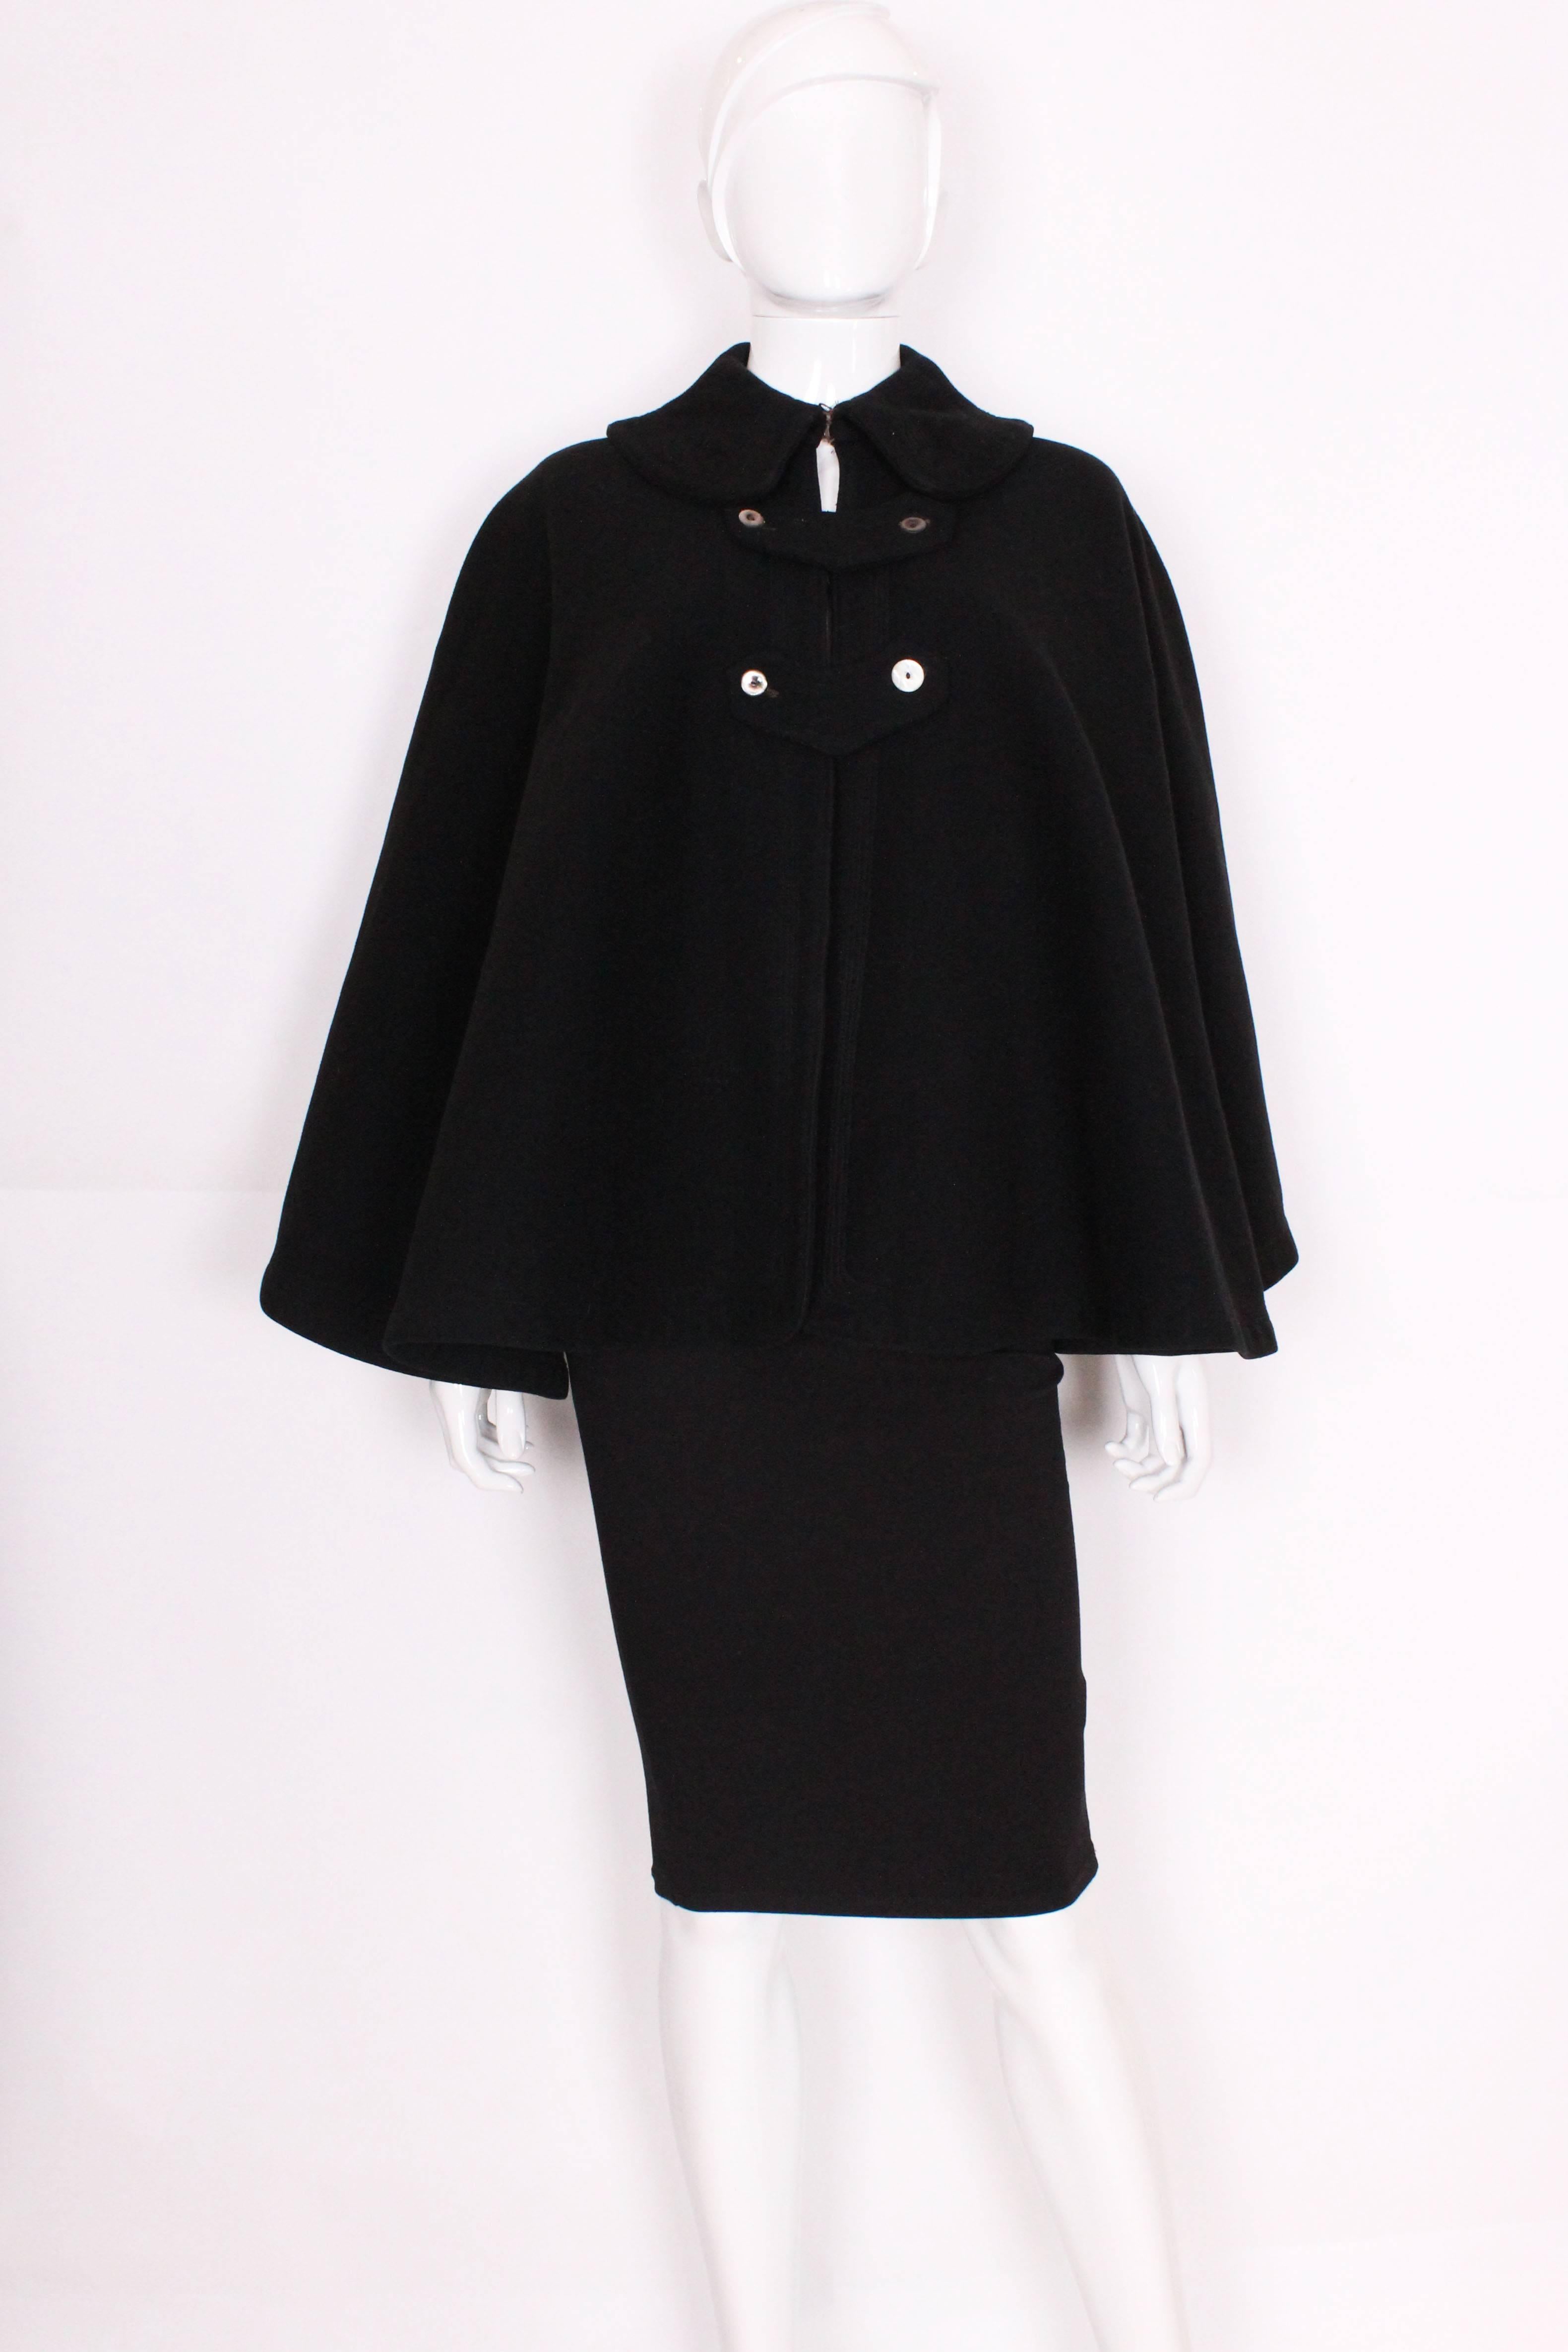 A heavy wool cape in a dark navy blue, useful and stylish for layering over outfits for the party season.This cape has a deep collar  (4''), with a hook and eye fastening.It has two rows of button attached strips to fasten the cape , thought these